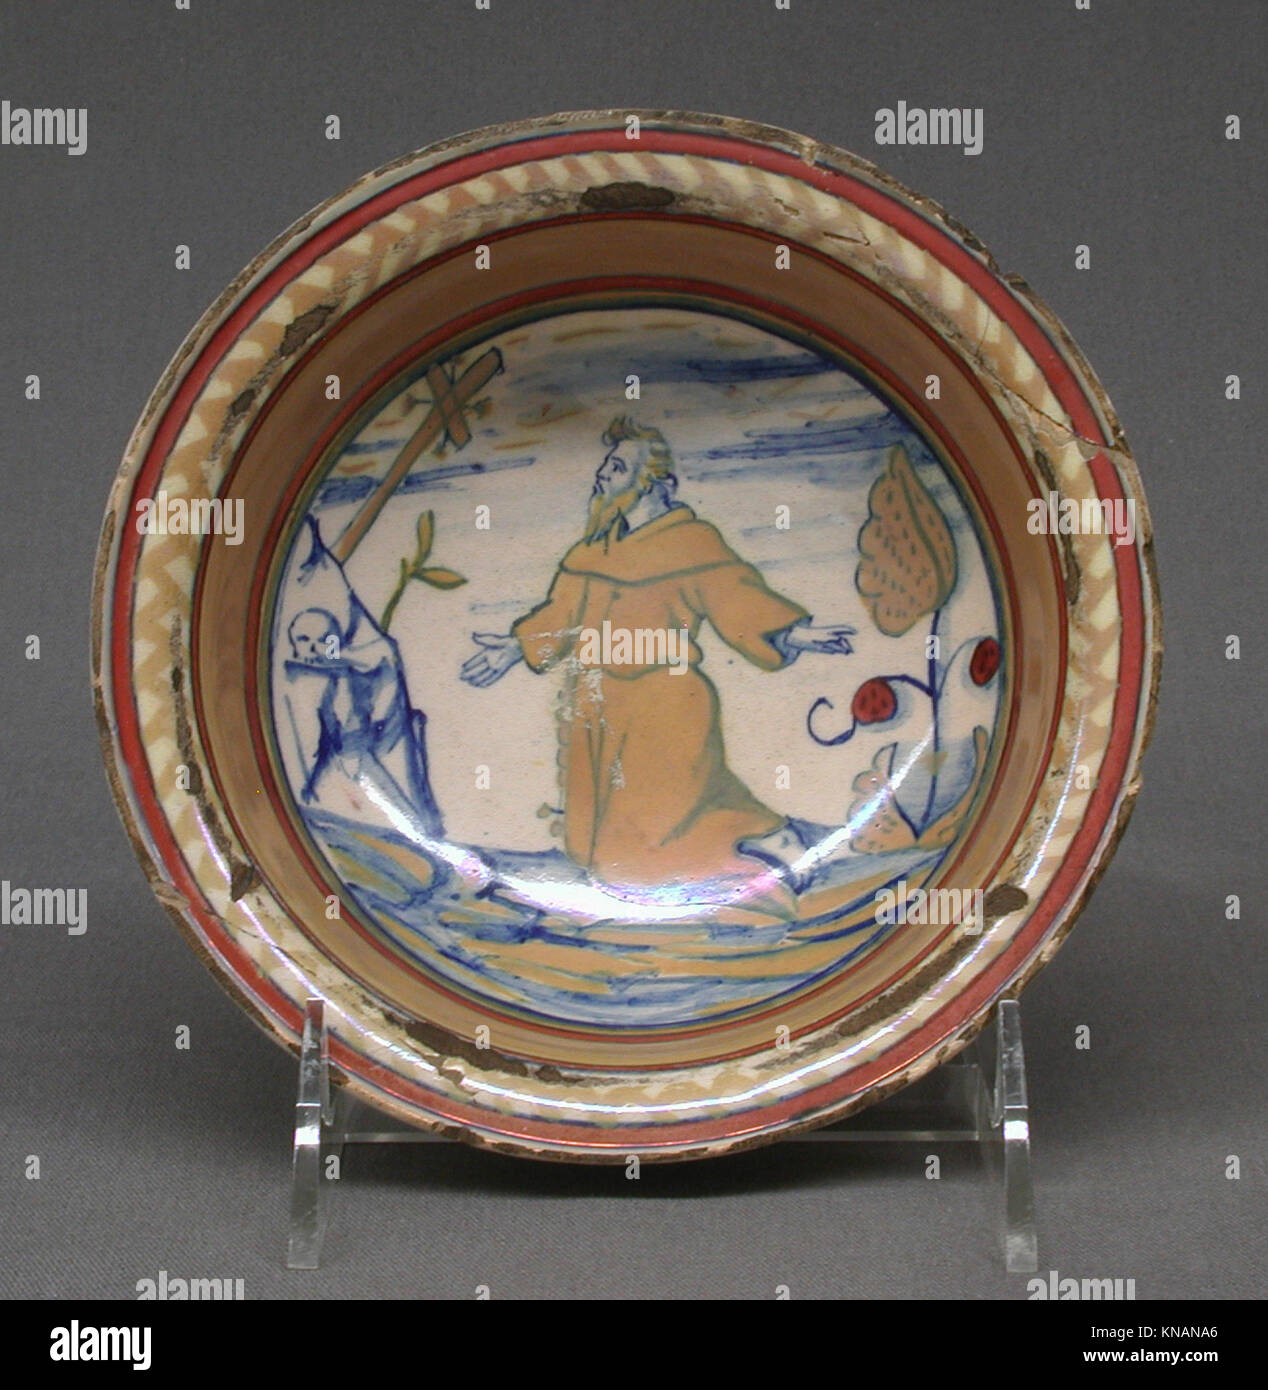 Bowl MET LC-84 2 10 186685 Italian, Gubbio, Bowl, 16th century, Maiolica (tin-glazed earthenware), lustered, Overall (confirmed): 2 x 5 13/16 in. (5.1 x 14.8 cm). The Metropolitan Museum of Art, New York. Purchase, 1884 (84.2.10) Stock Photo